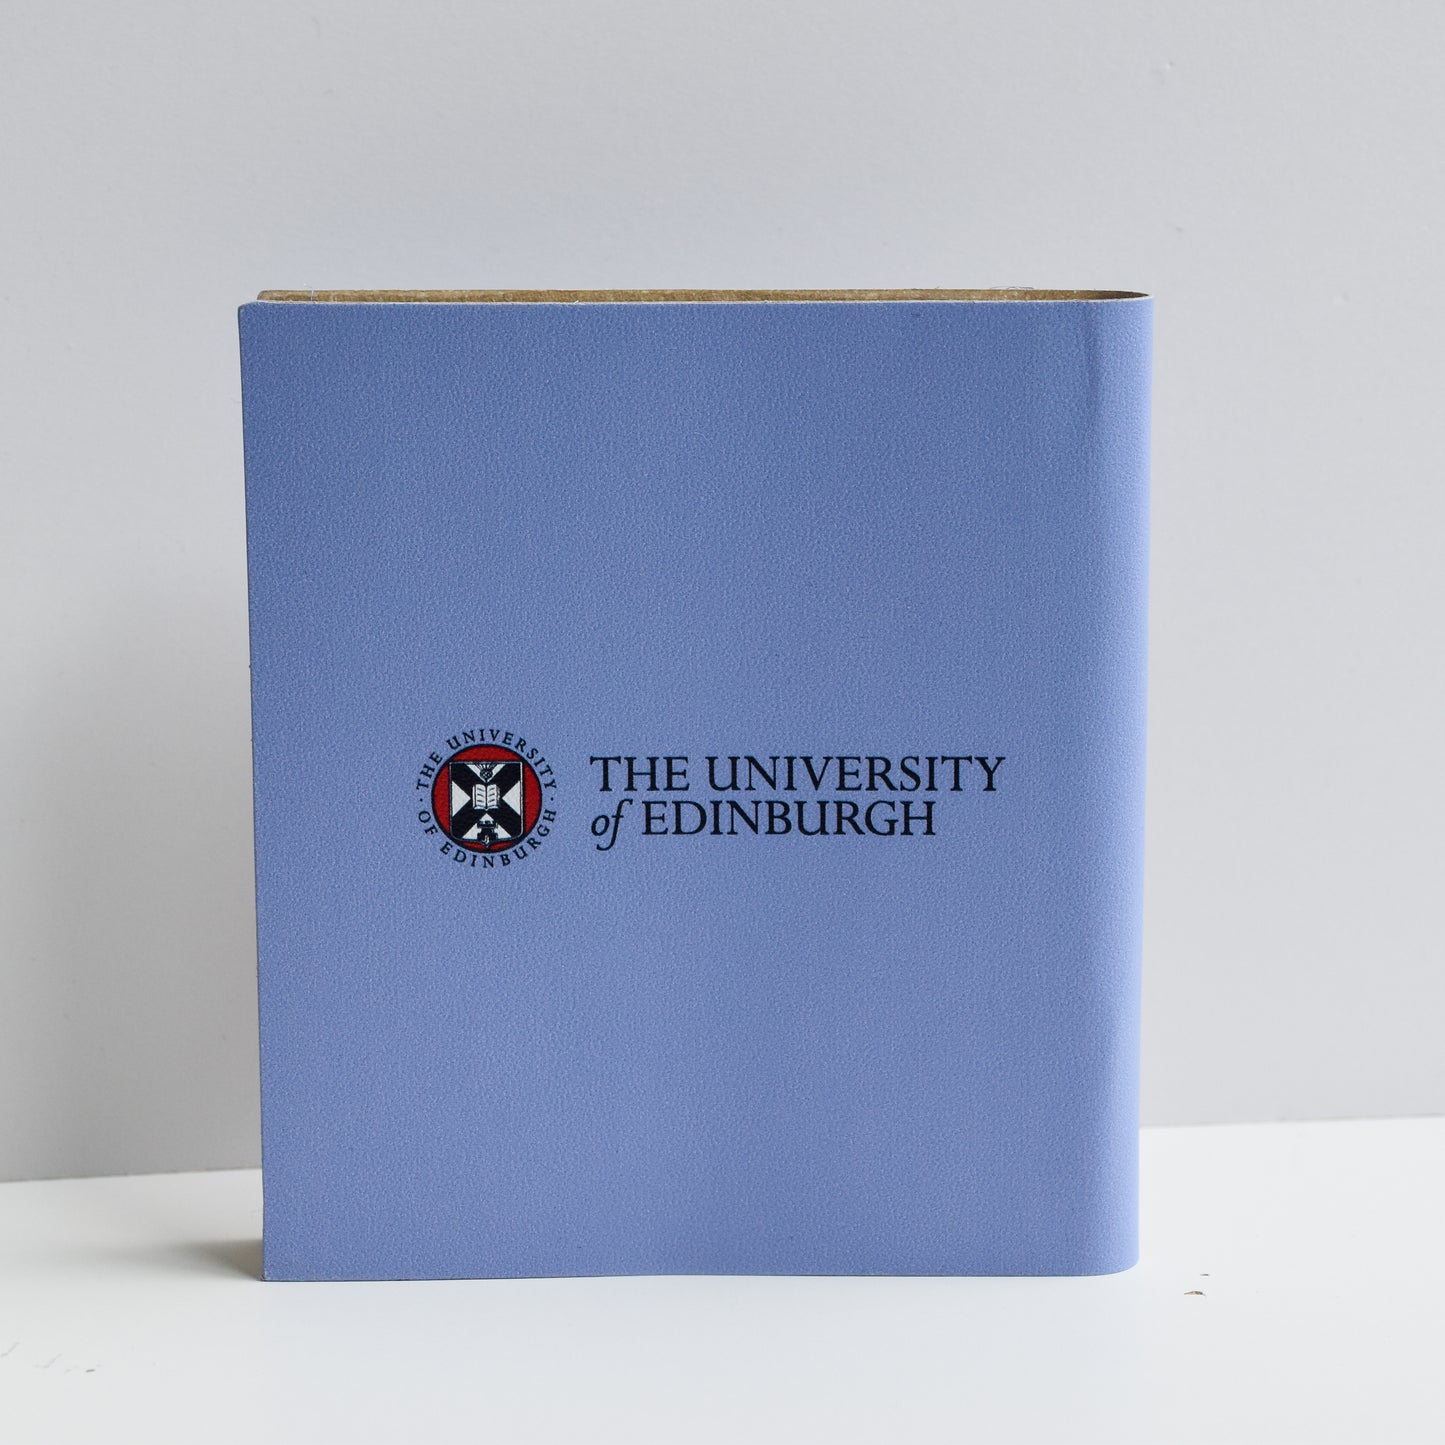 A close up of the Graduation Day Notebook back cover. It is blue with the University of Edinburgh crest, and 'The University of Edinburgh' in black text to the right of it in the centre of the cover.